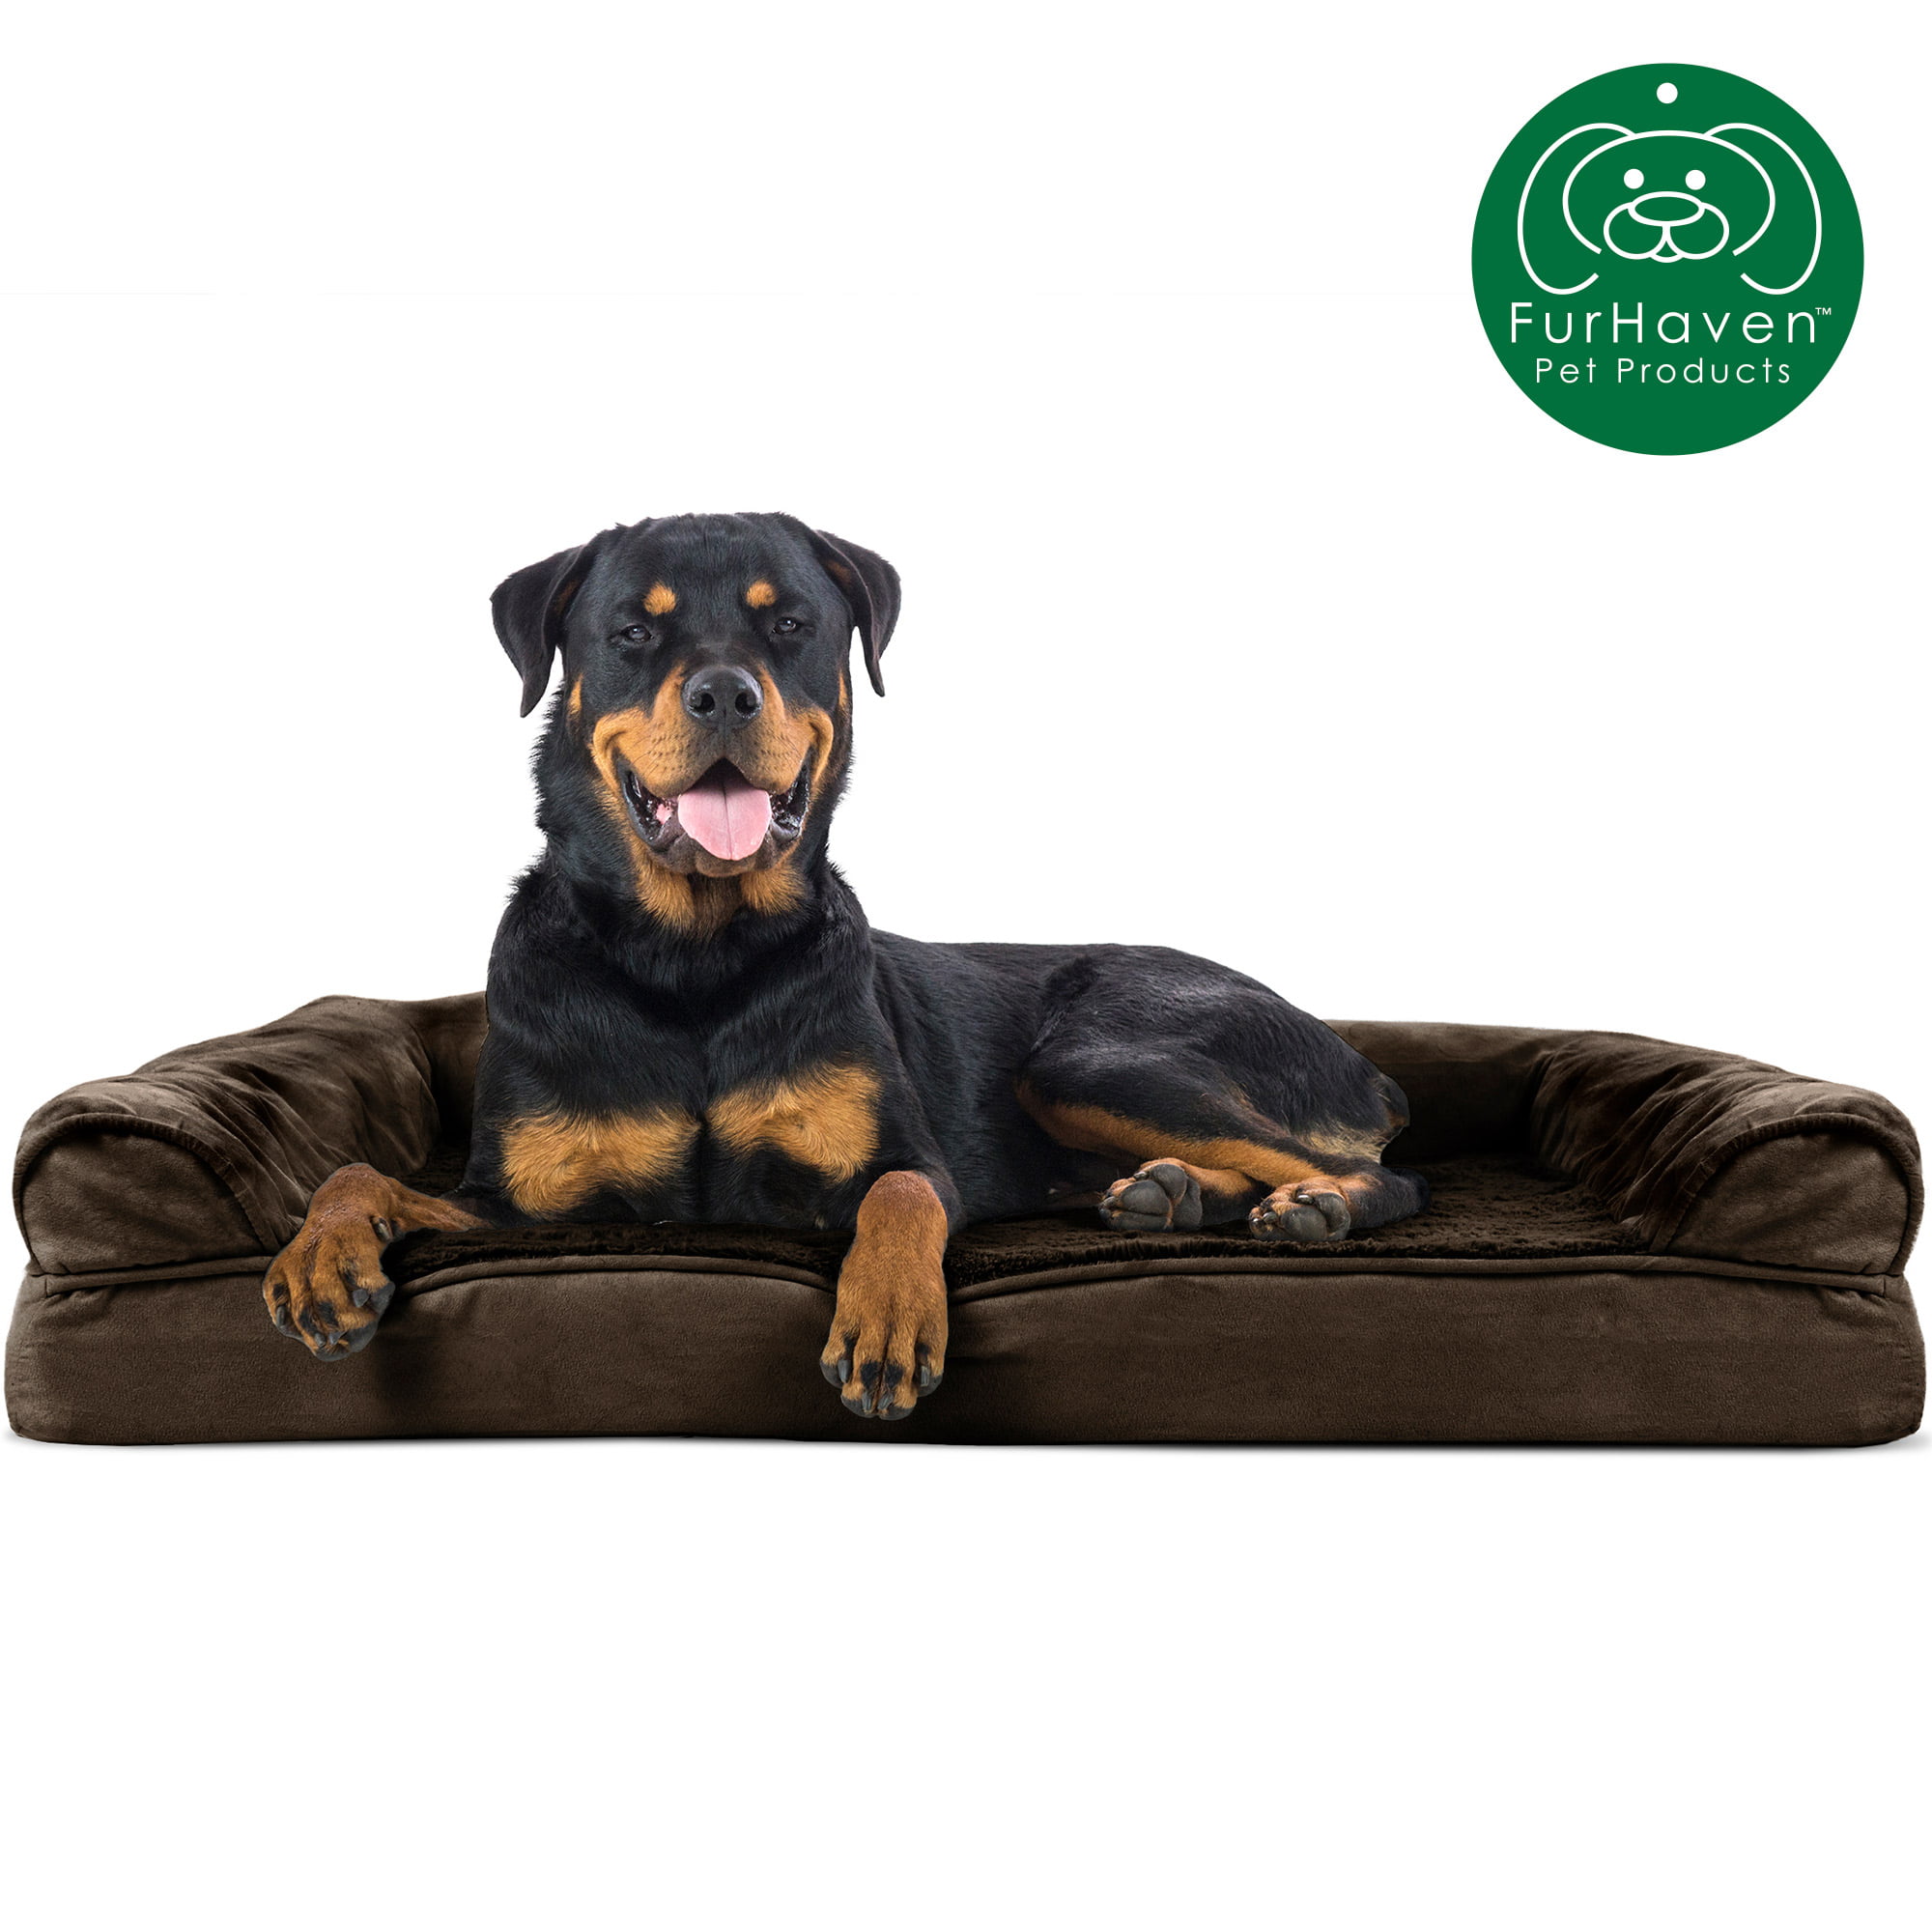 Large and Jumbo Premium Memory Foam Pet Dog Sofa Bed Lounger with Washable Cover for Dogs & Cats Animal Planet Orthopedic Luxury Dog Bed 